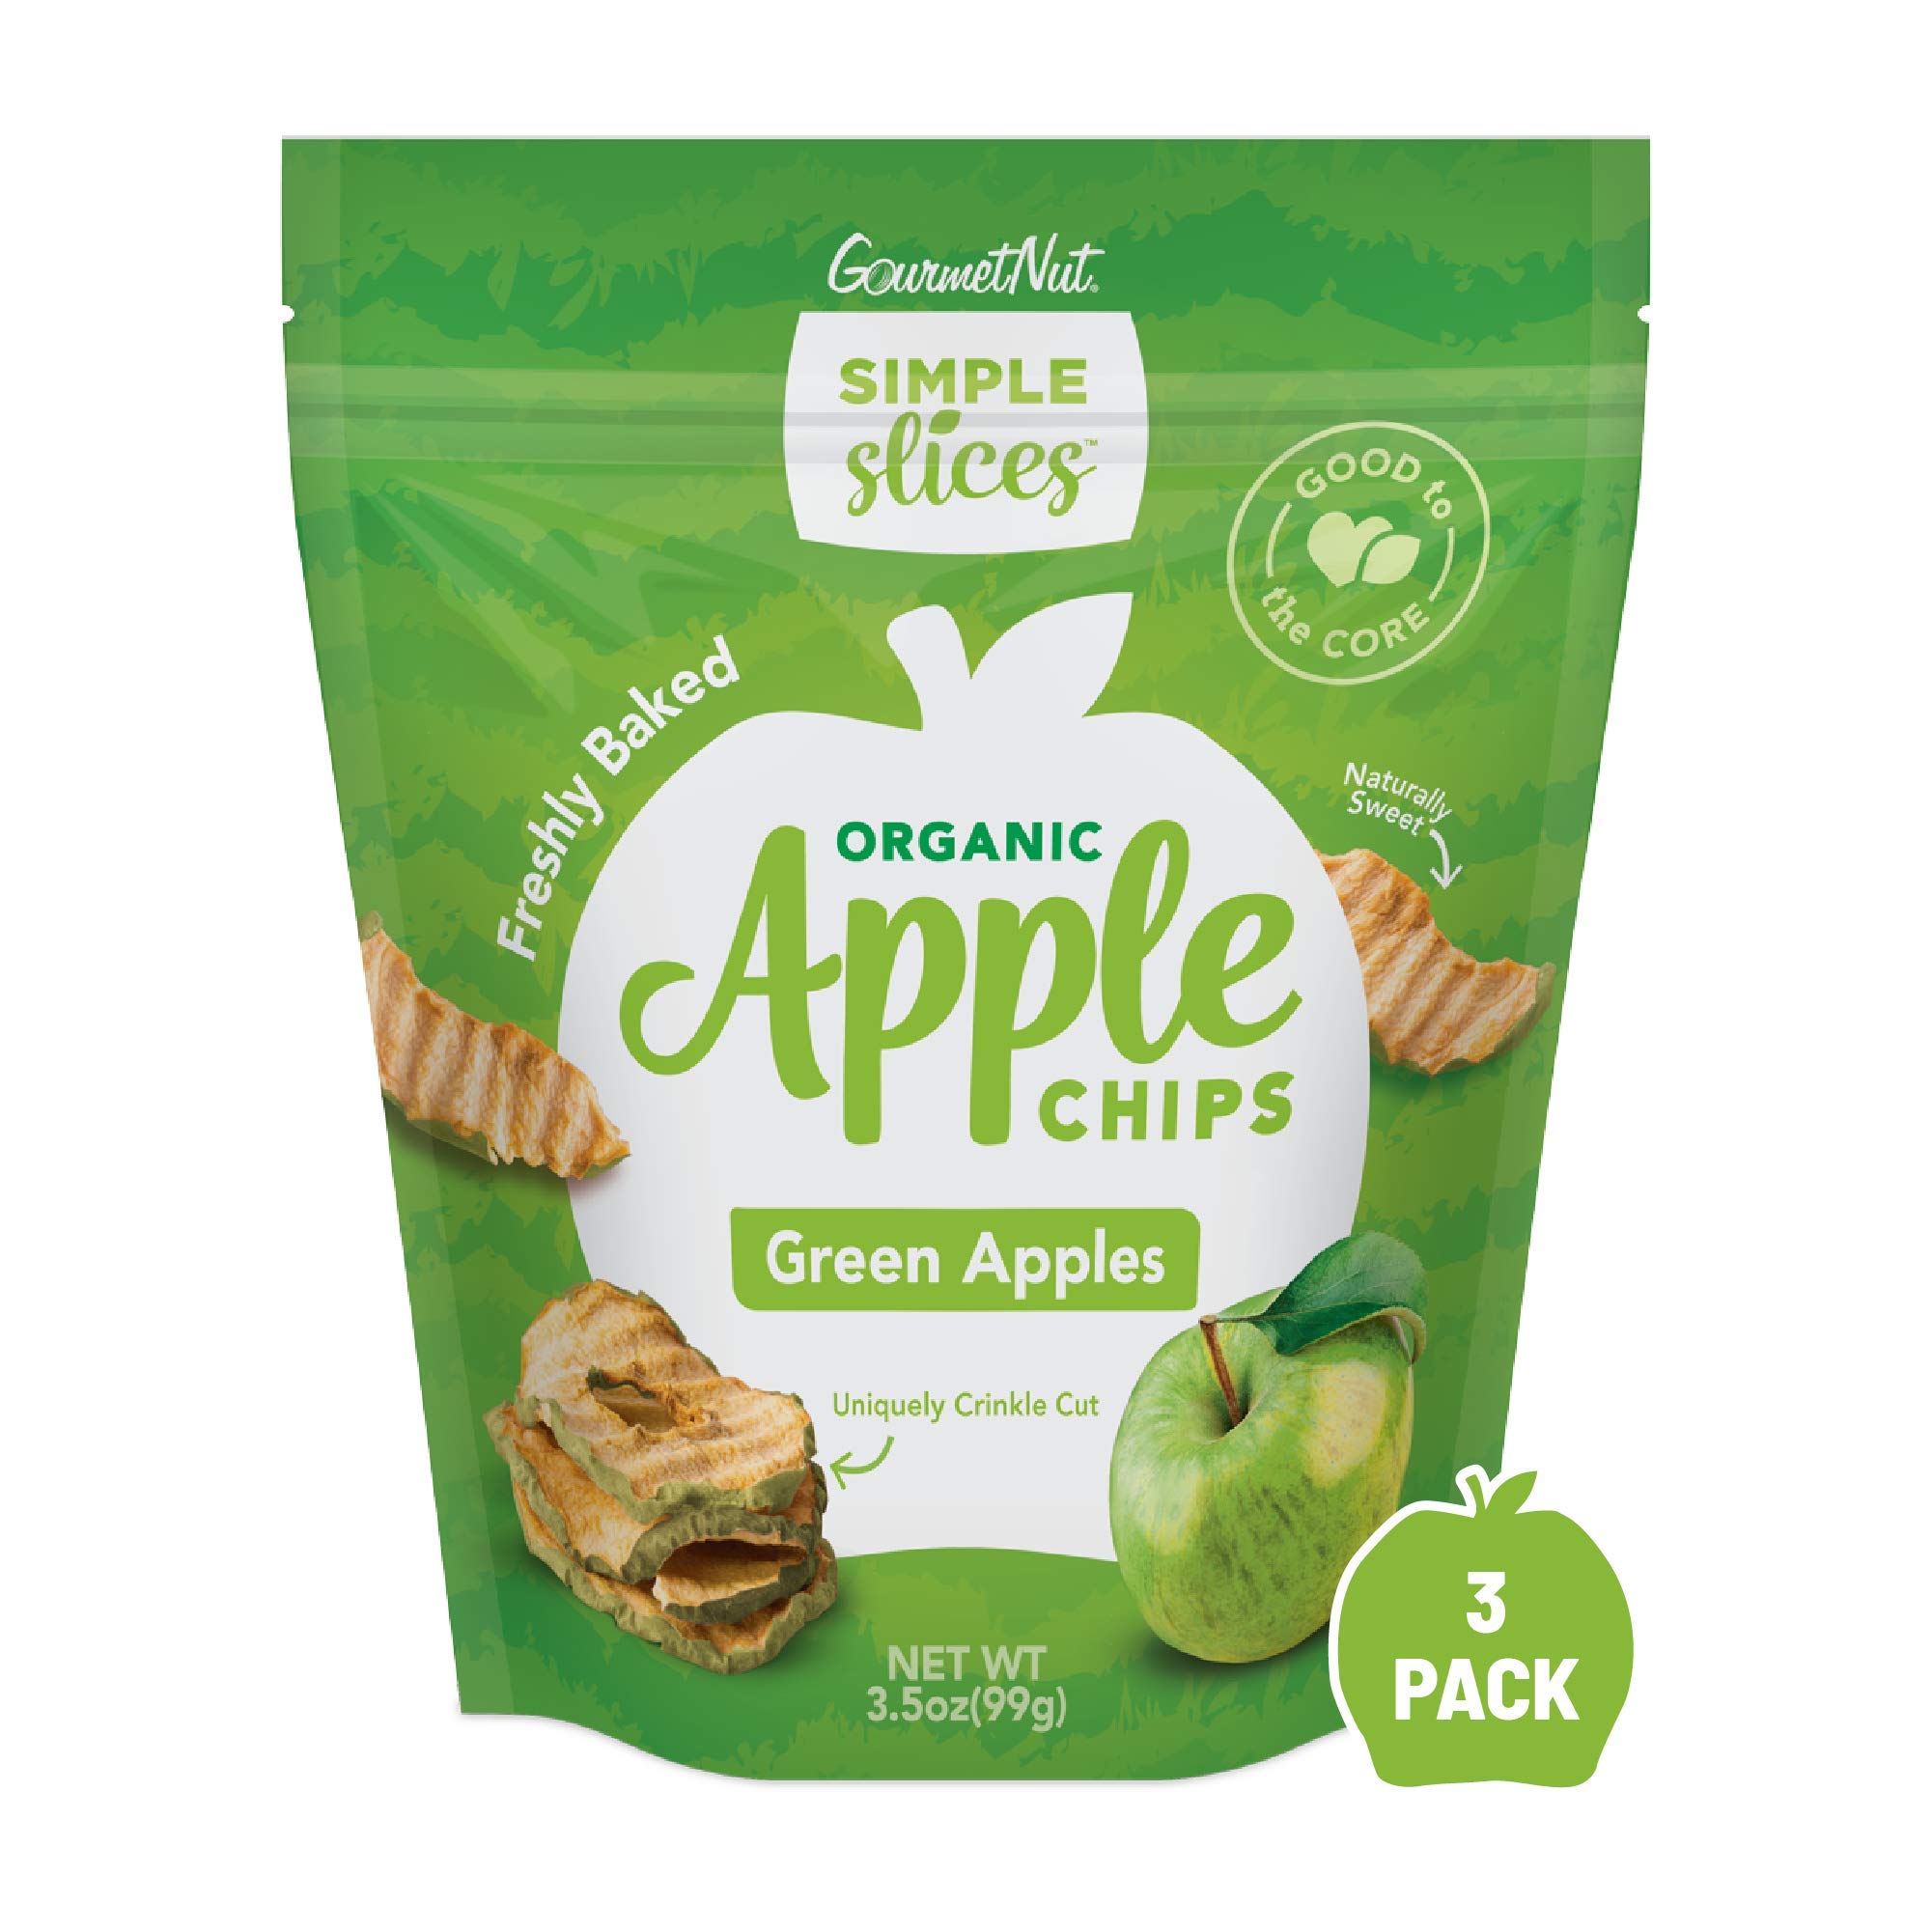 Gourmet Nut Simple Slices Organic Baked Apple Chips, USA Grown Apples, No  Added Sugar, Green Apples, 3.5oz bags, Pack of 3 Organic Green 3.5 Ounce  (Pack of 3)